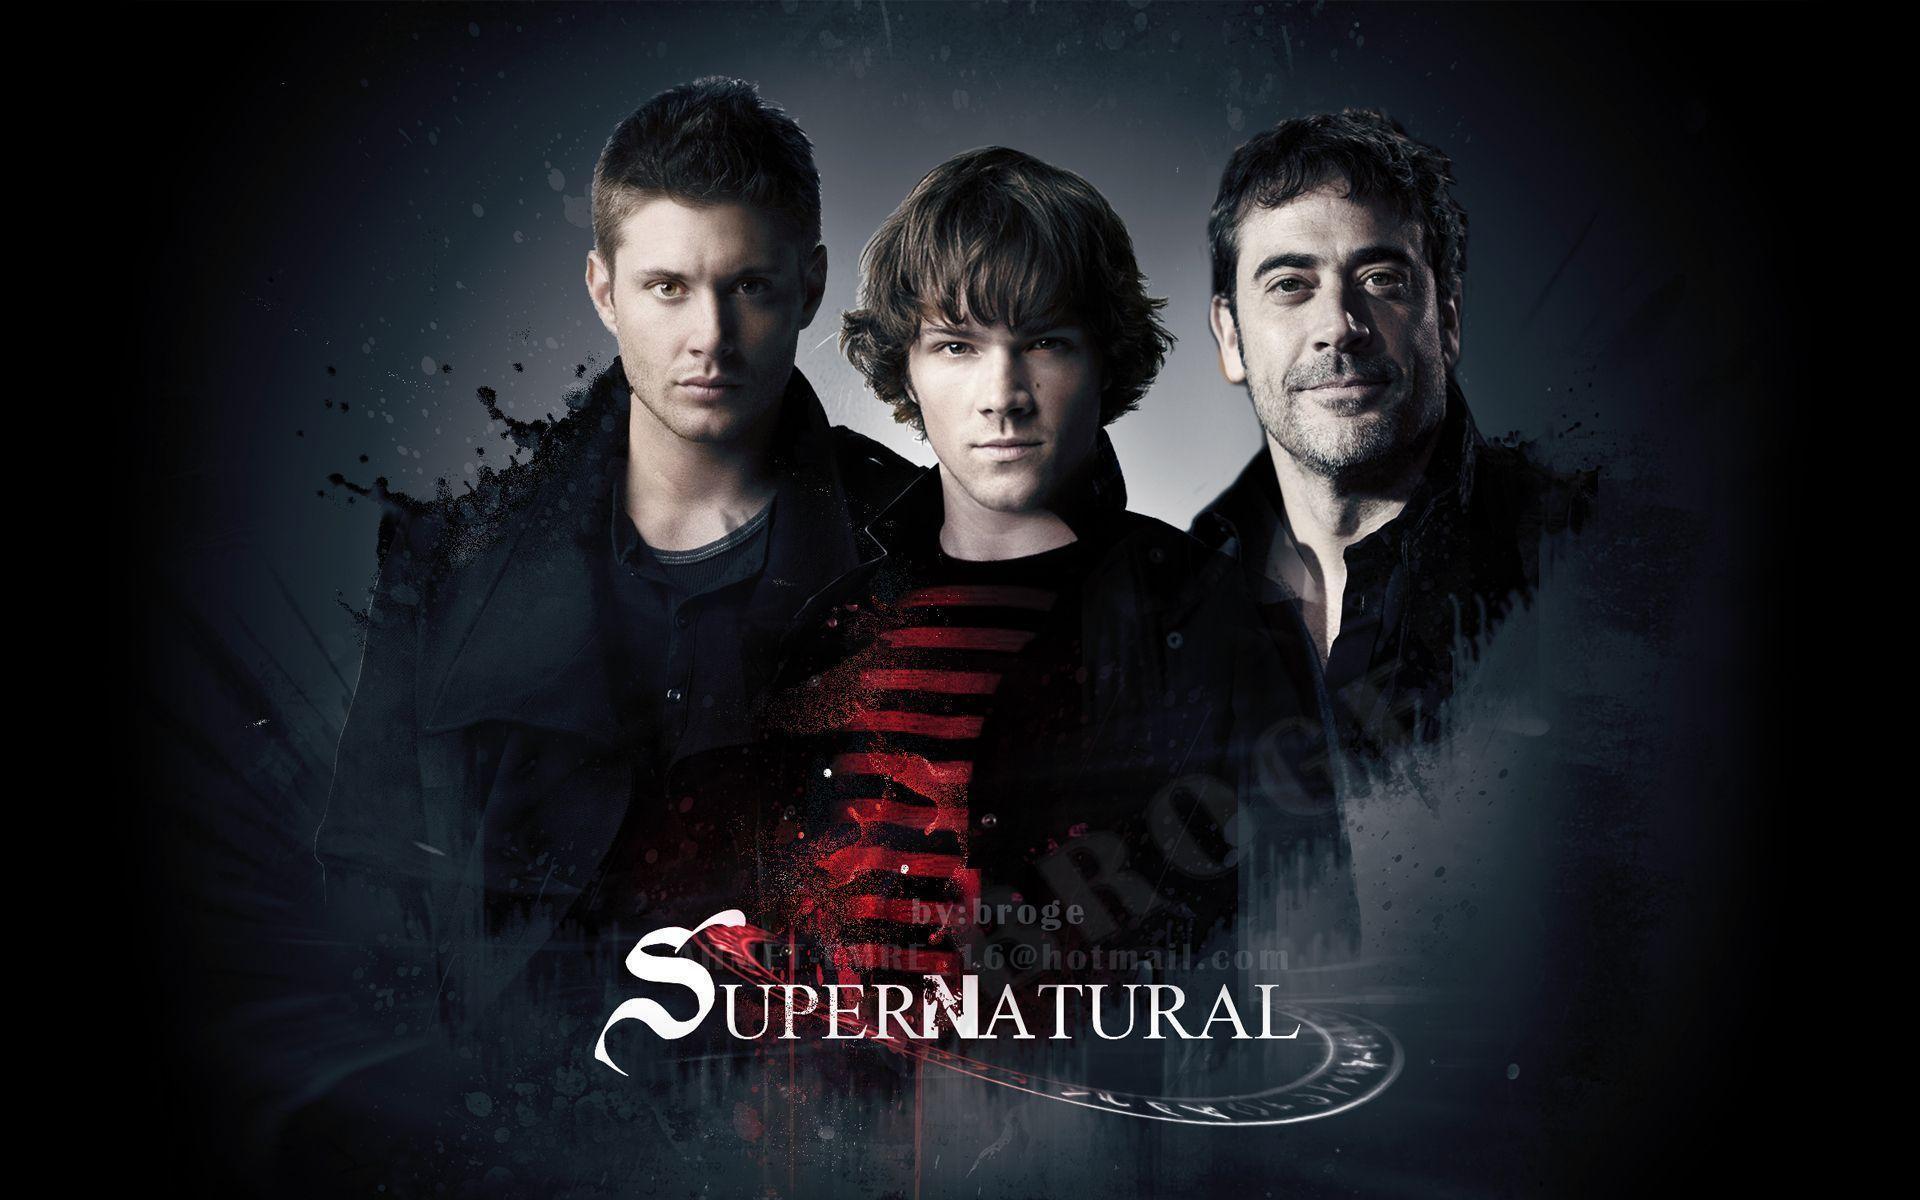 Supernatural Wallpaper Archives.info. Free HD